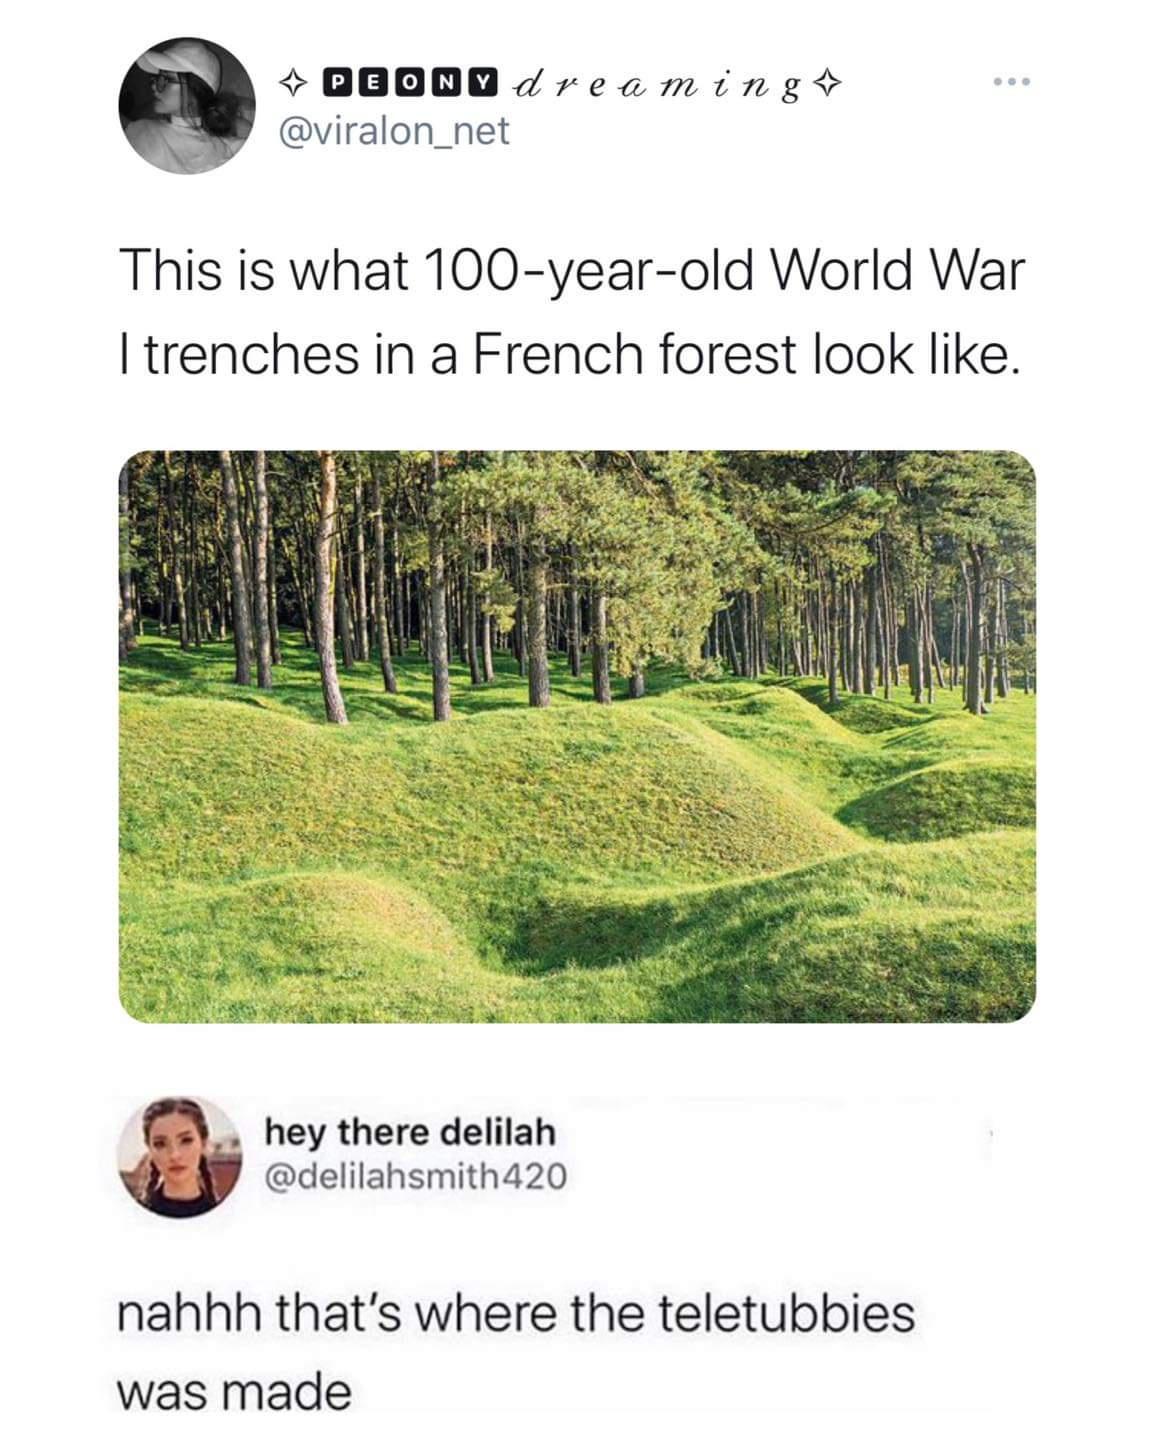 grass - Peonv dreaming This is what 100yearold World War I trenches in a French forest look . hey there delilah 420 nahhh that's where the teletubbies was made